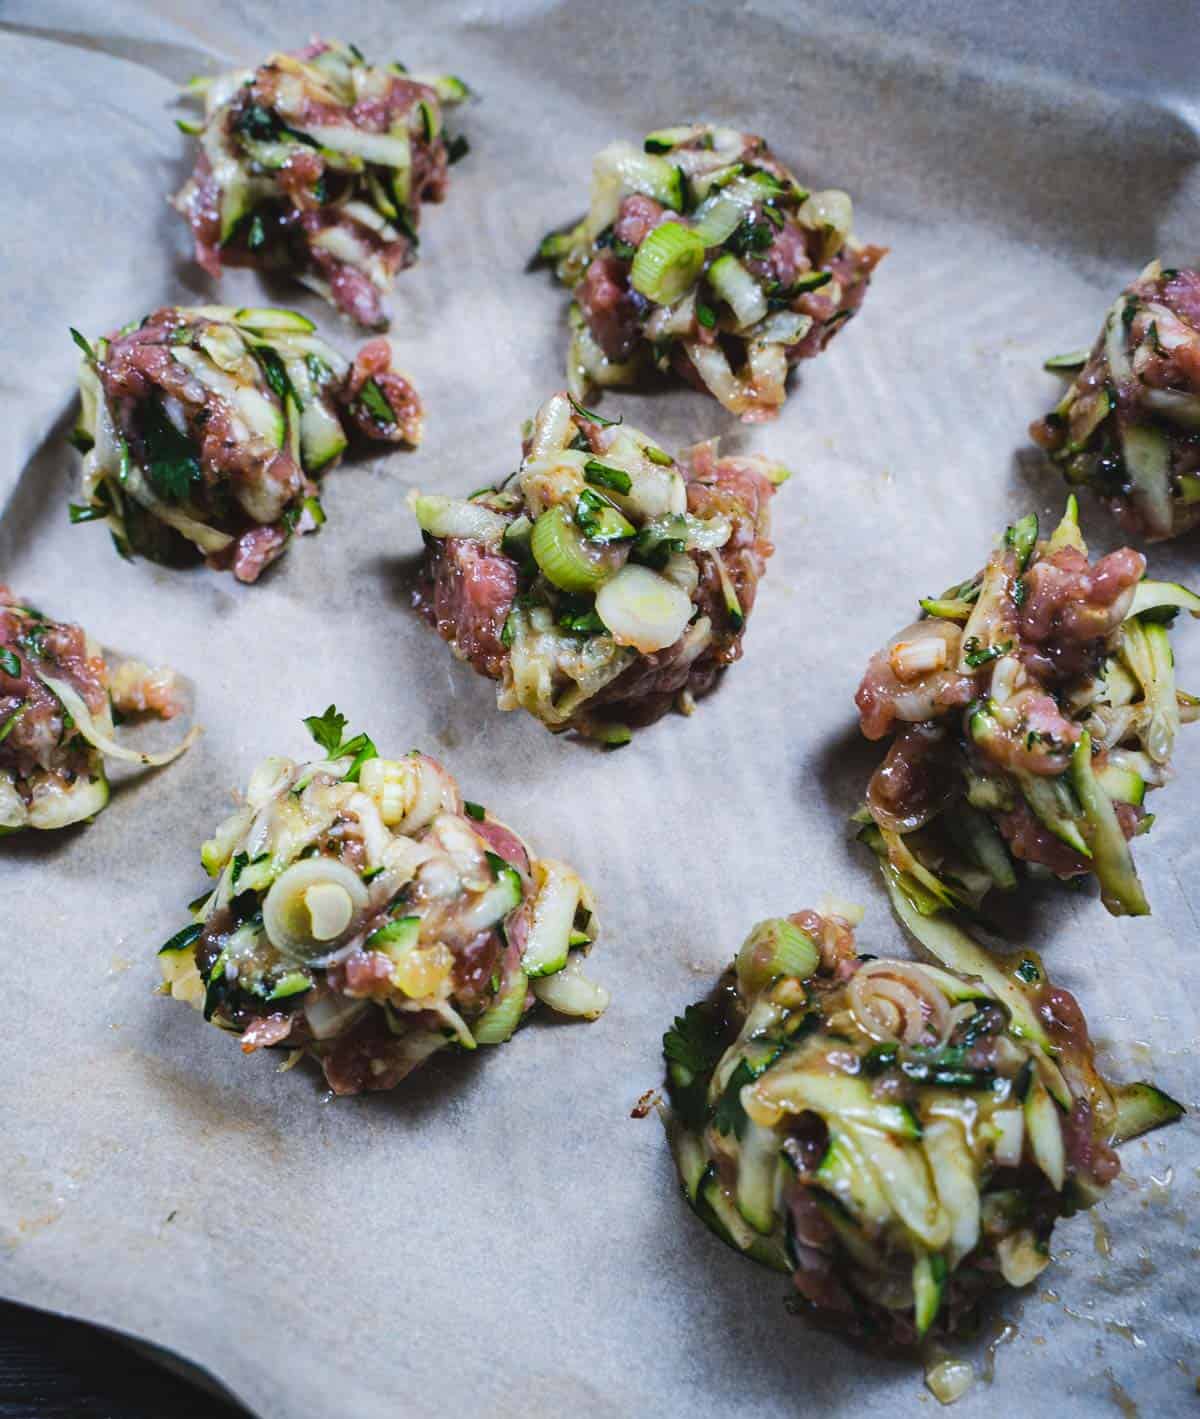 Meatballs in a spherical shape on a parchment paper lined sheet pan.